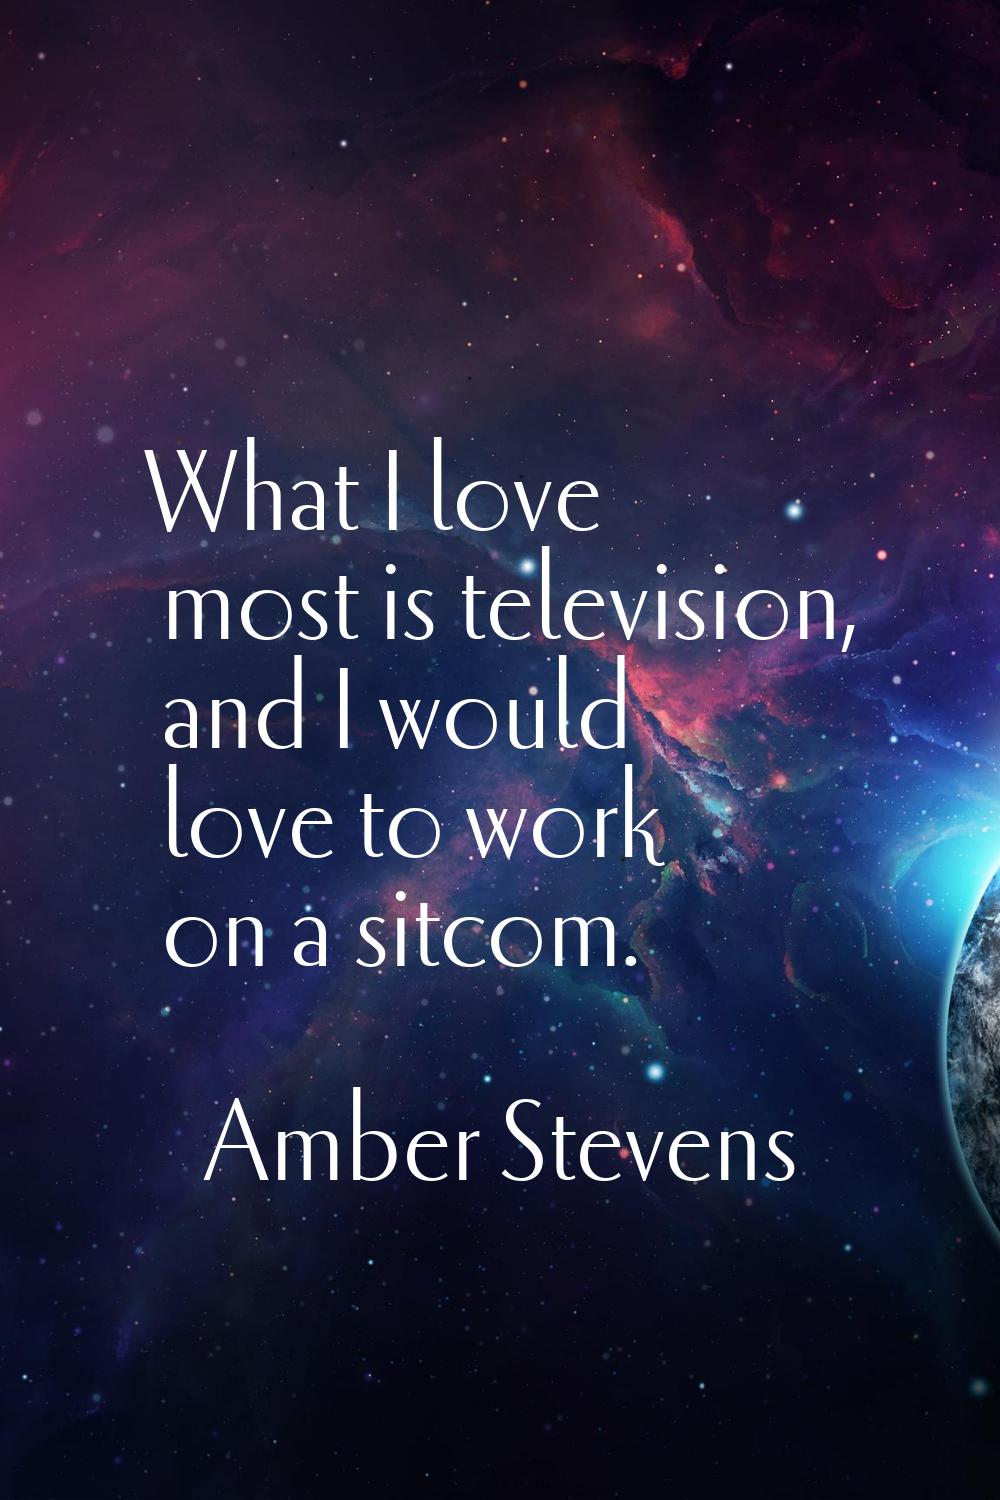 What I love most is television, and I would love to work on a sitcom.